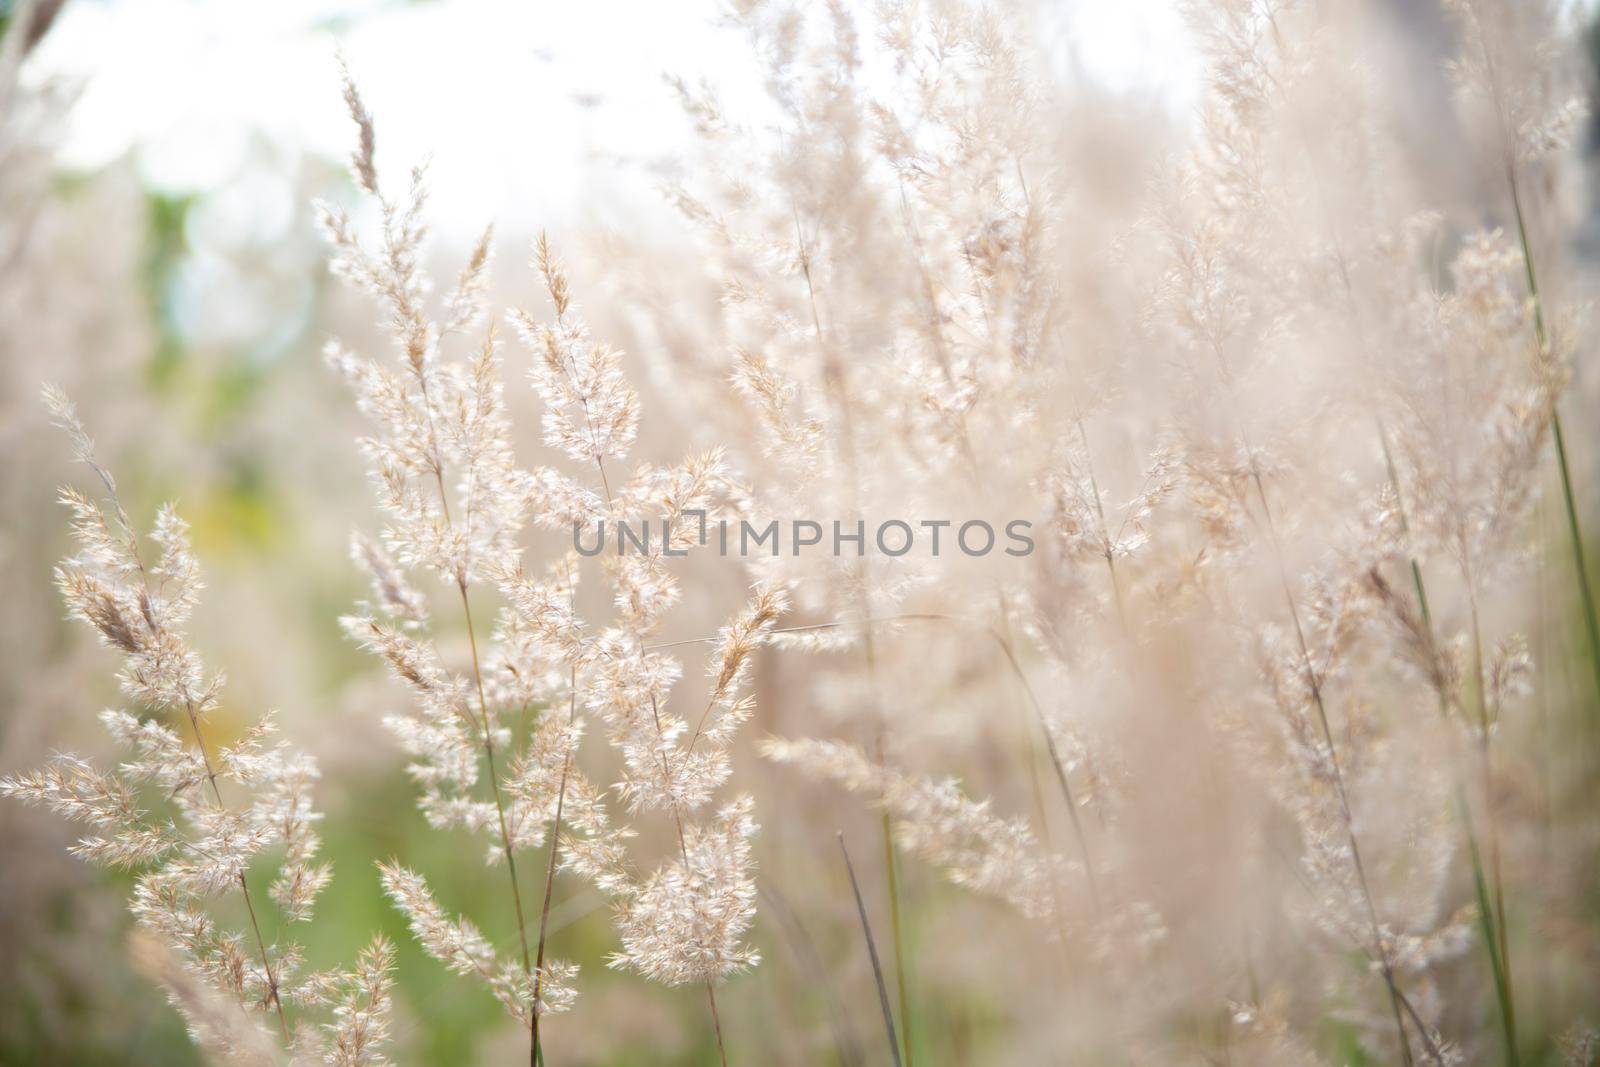 Pampas grass in the sunshine, Abstract natural background of soft plants Cortaderia selloana moving in the wind.